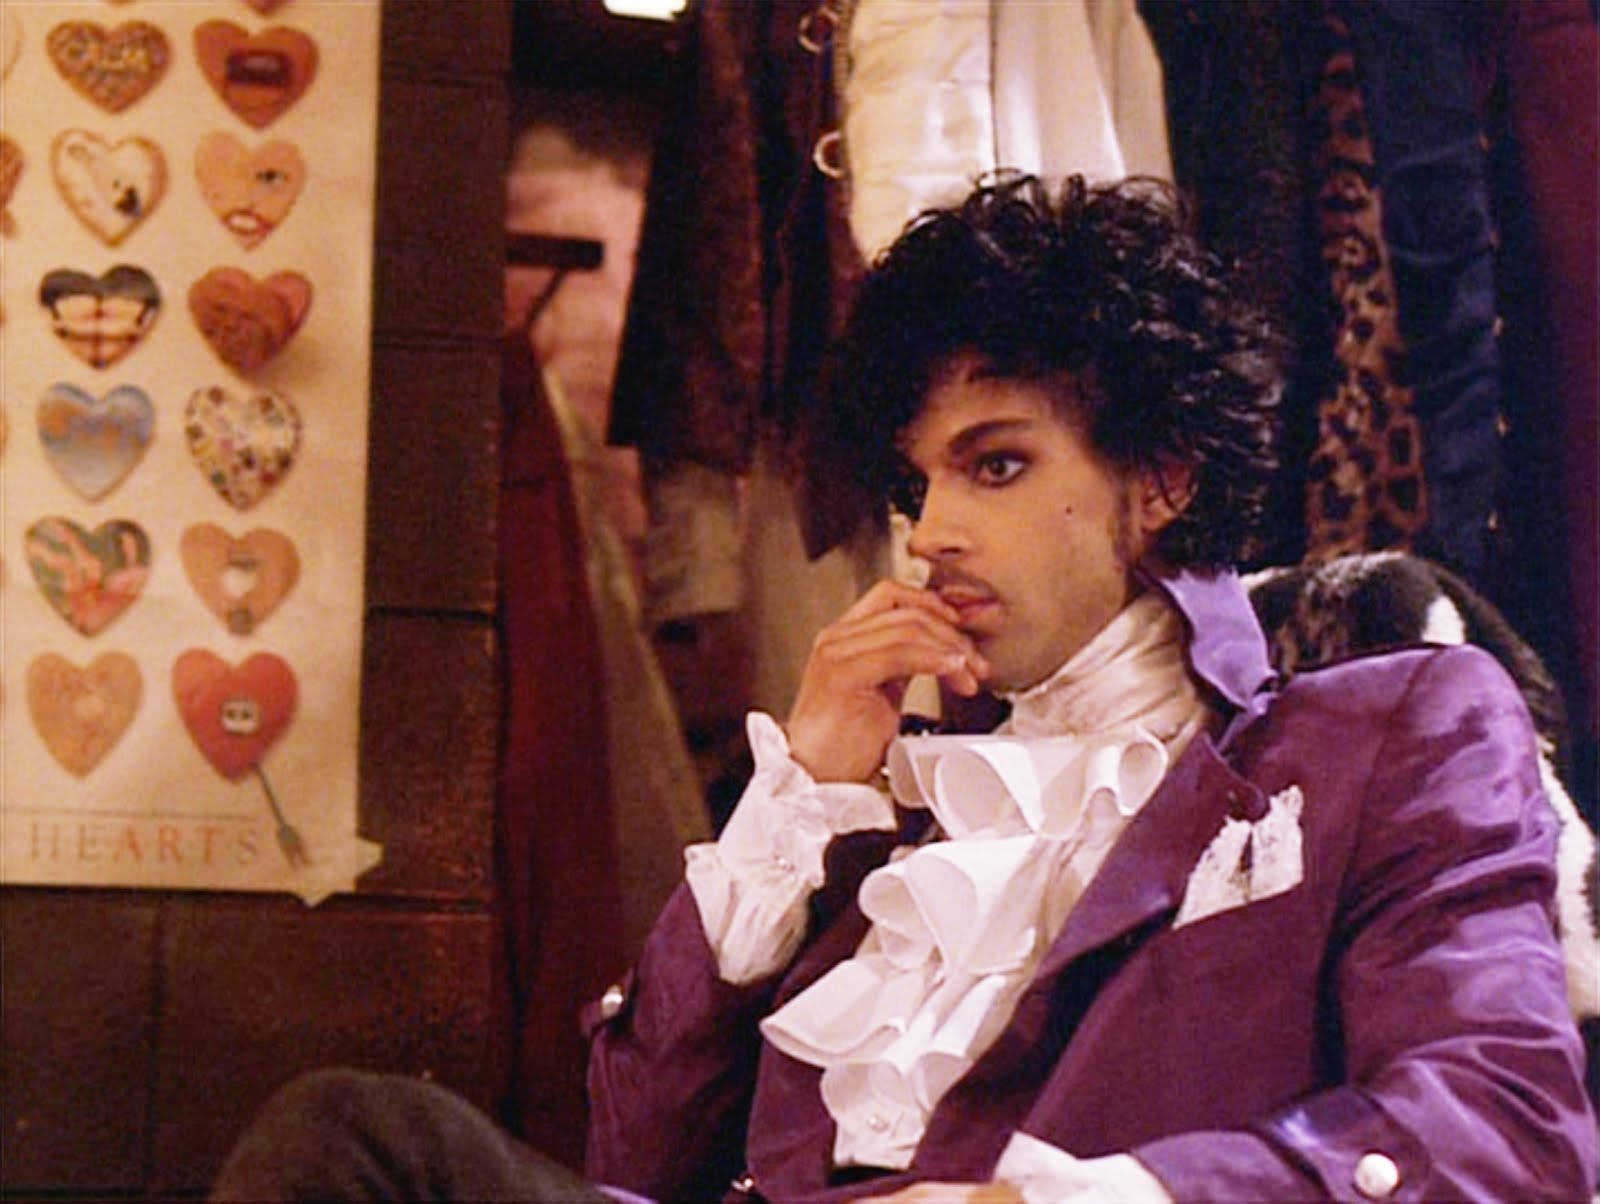 Prince HD Wallpaper Background Image